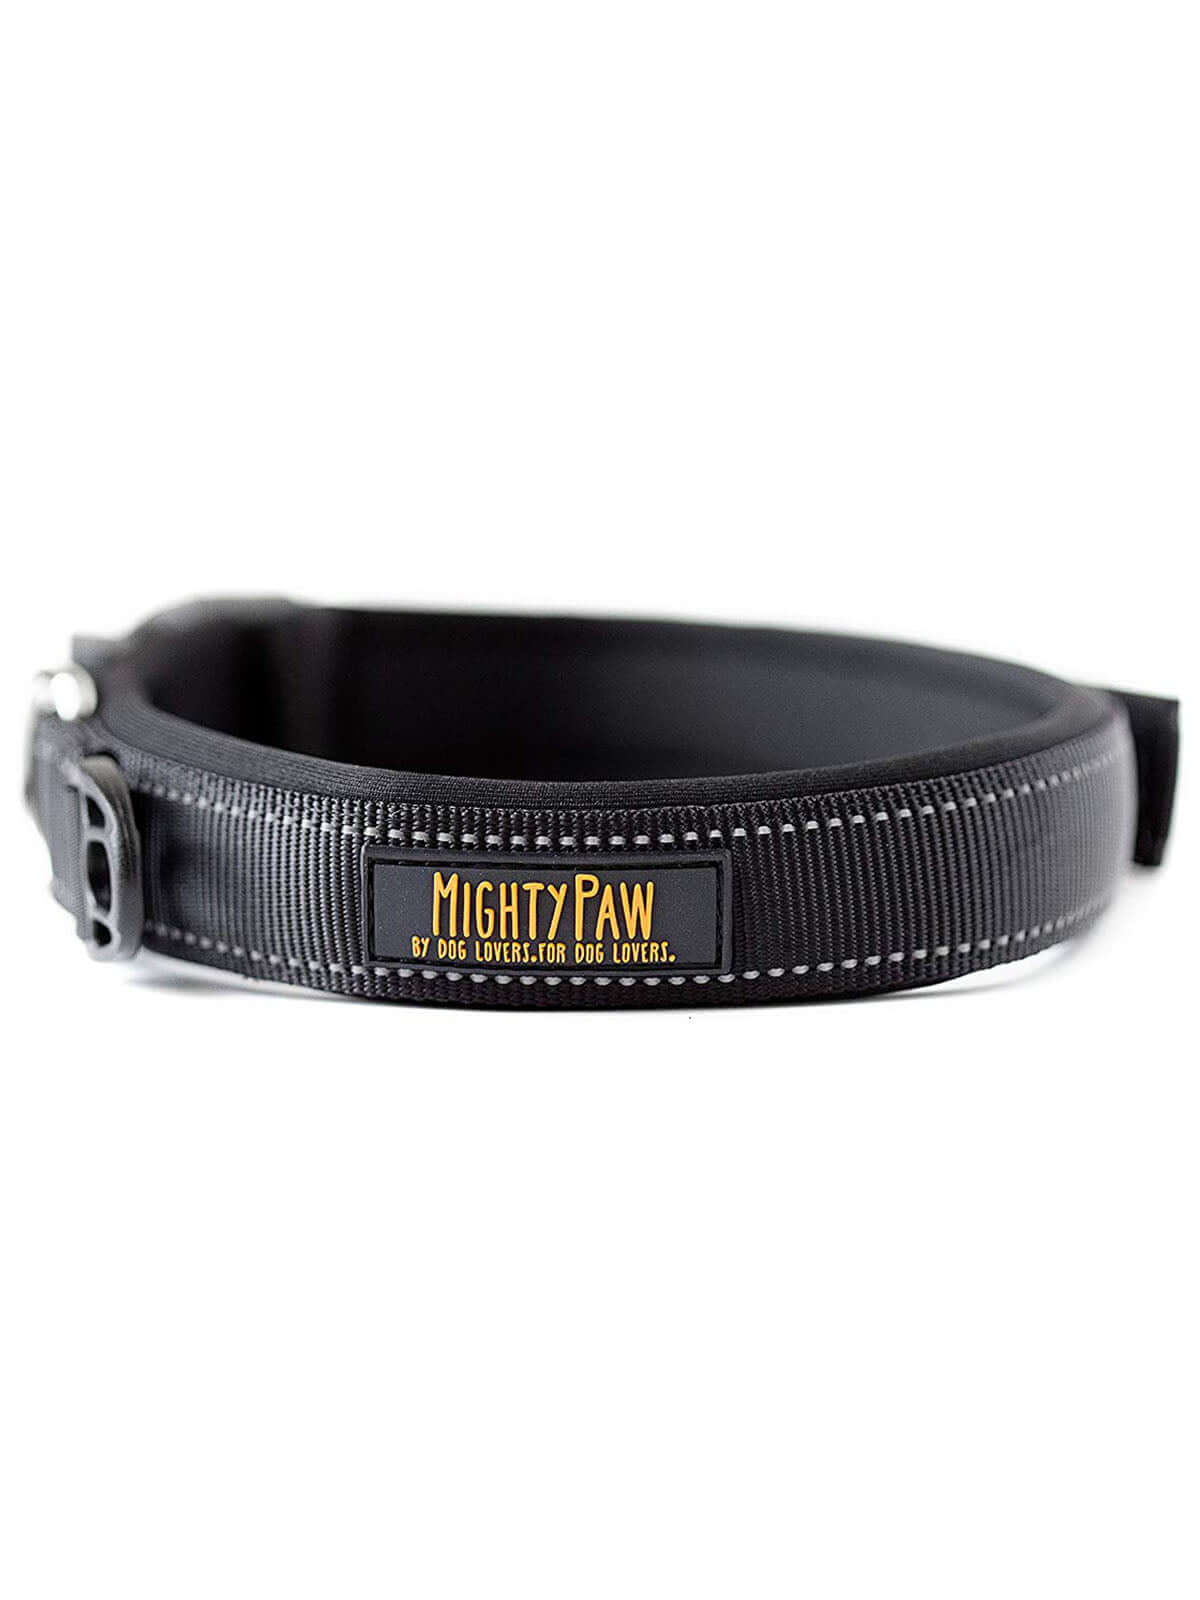 Neoprene Padded Dog Collar - Mighty Paw Sport Collar with Reflective Stitching